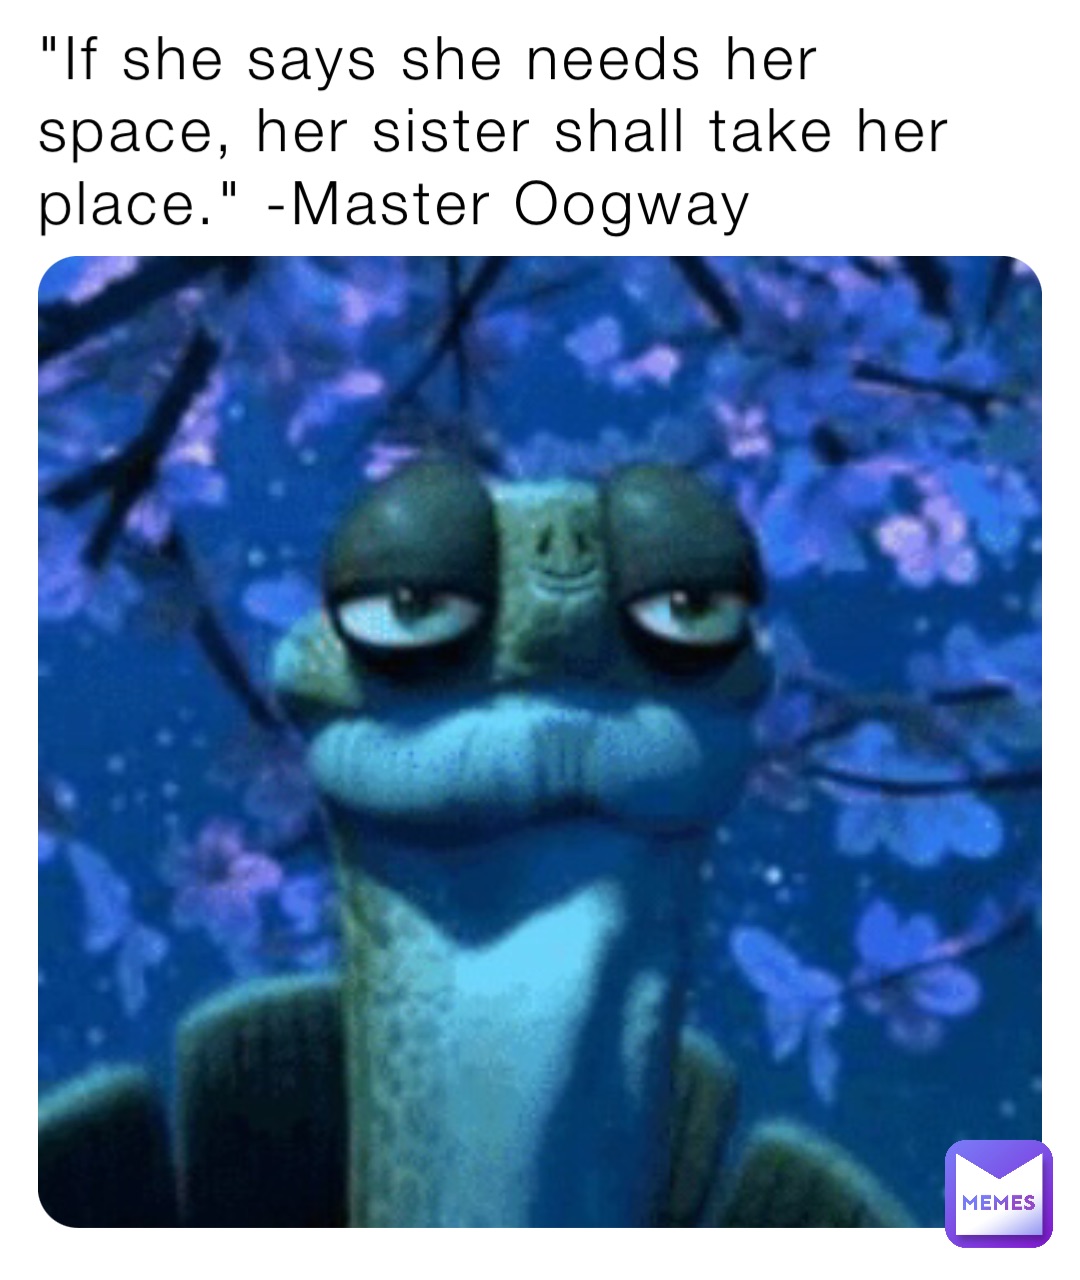 "If she says she needs her space, her sister shall take her place." -Master Oogway